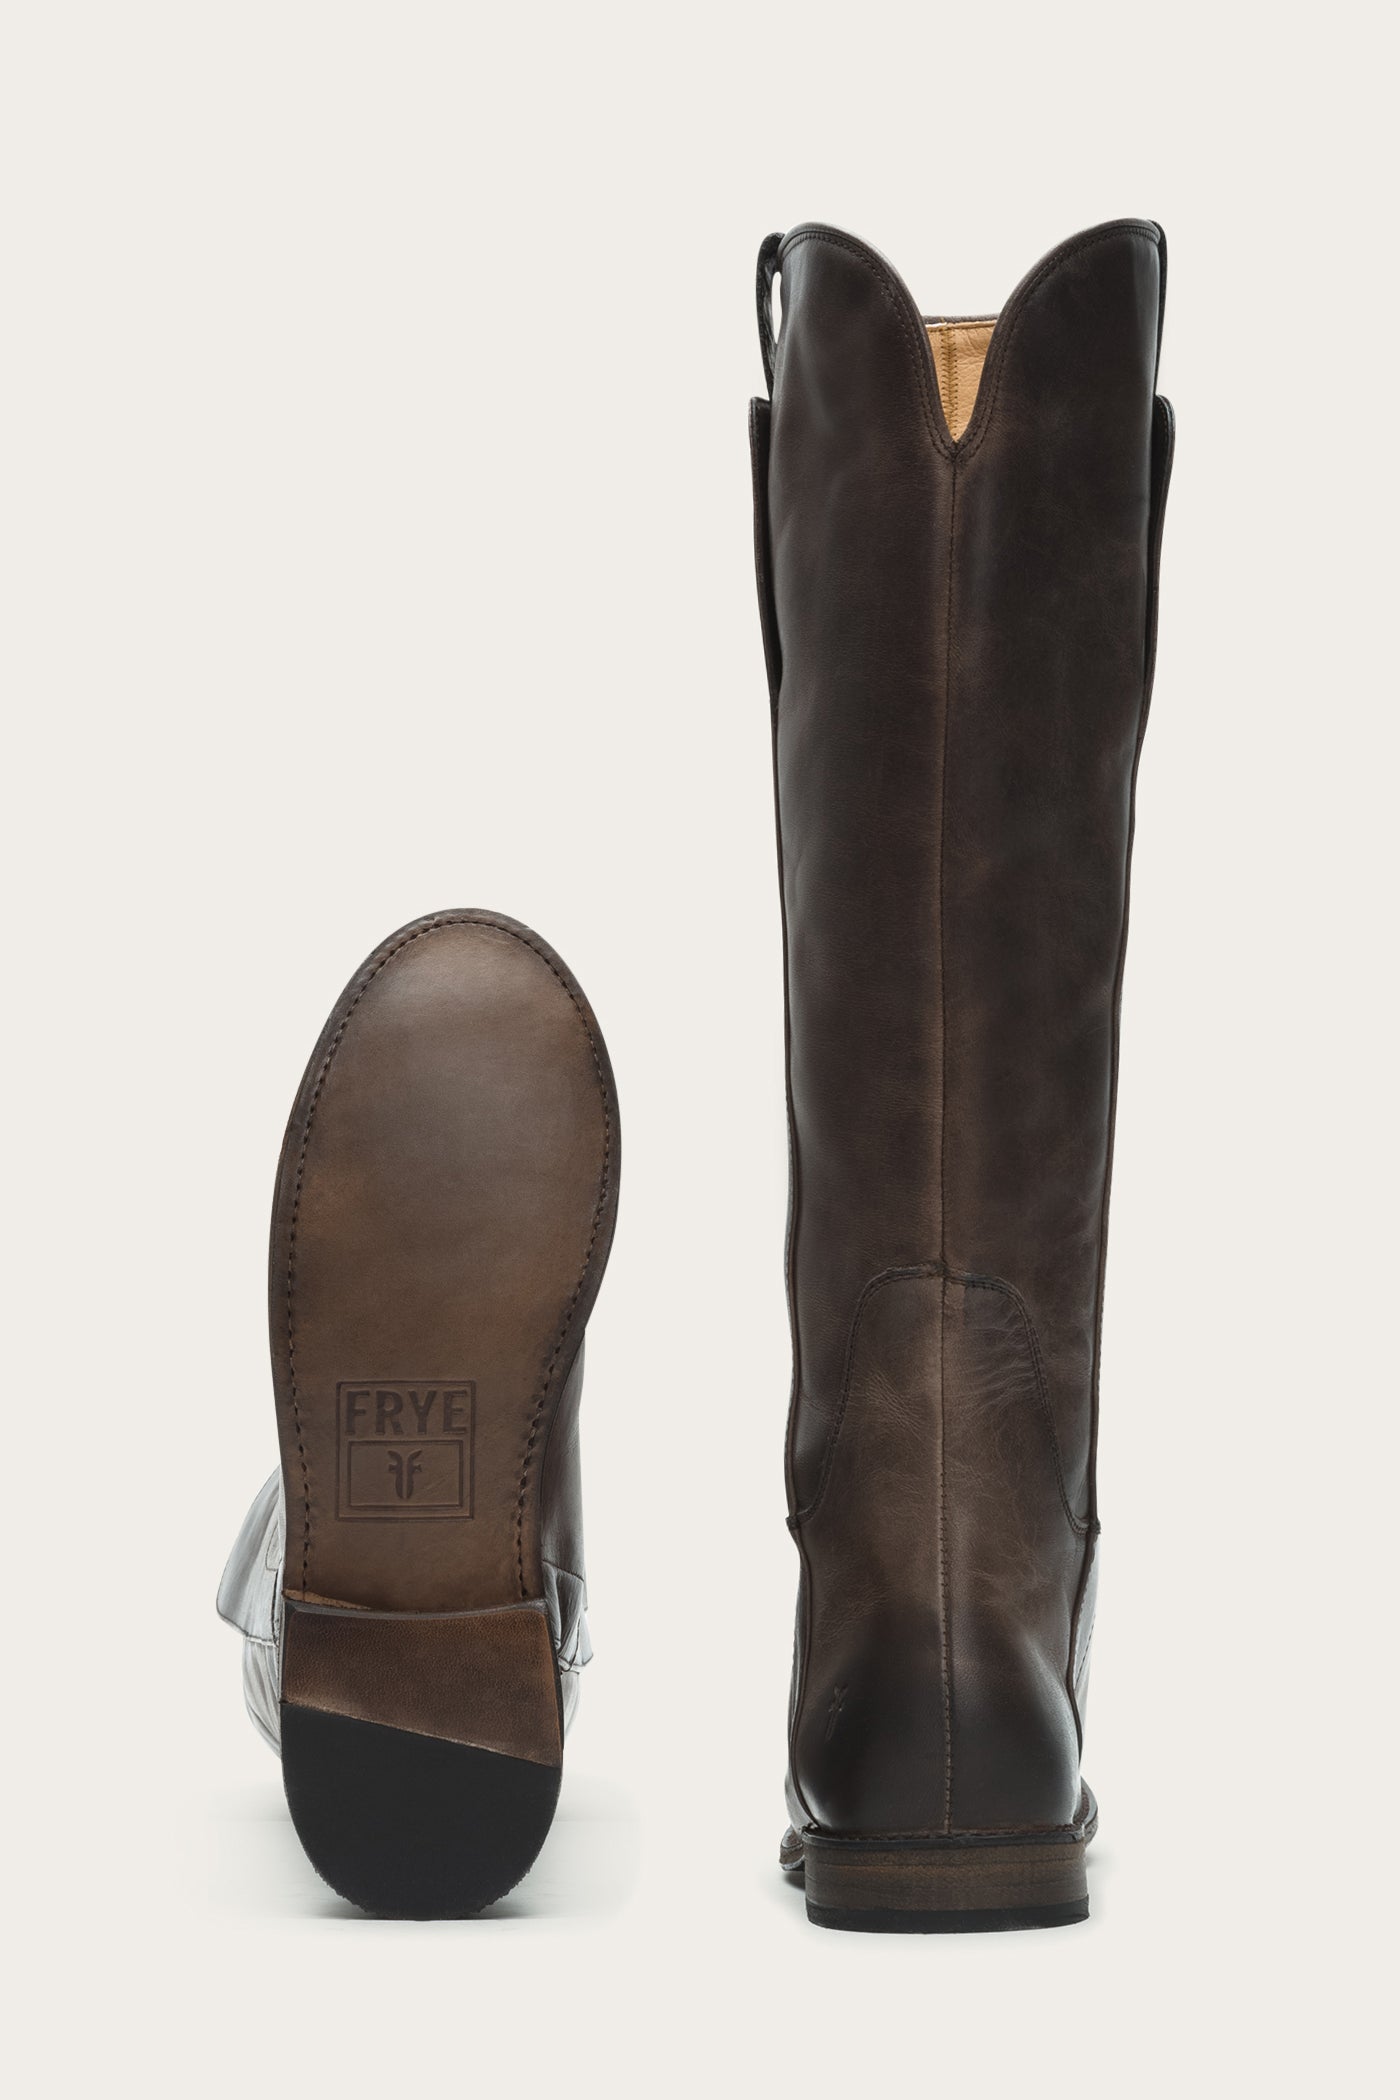 frye boots paige tall riding sale